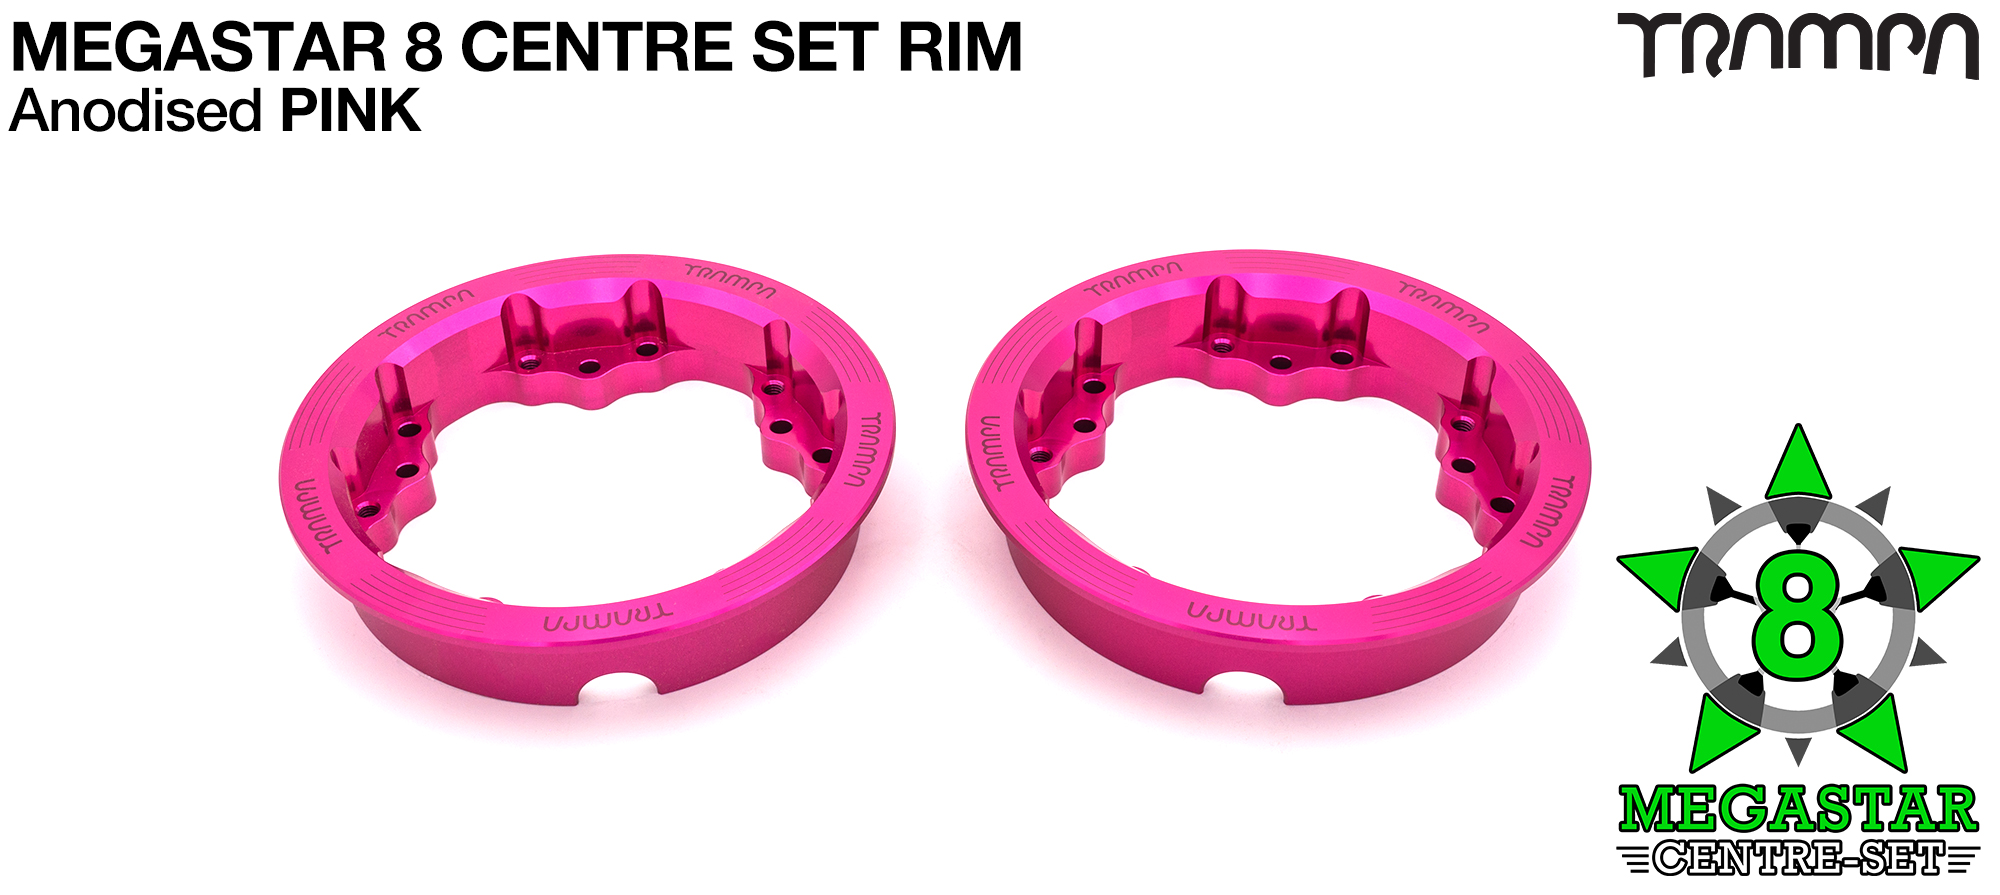 MEGASTAR 8 CS Rims Measure 3.75 x 2 Inch. The bearings are positioned CENTRE-SET & accept all 3.75 Rim Tyres - PINK